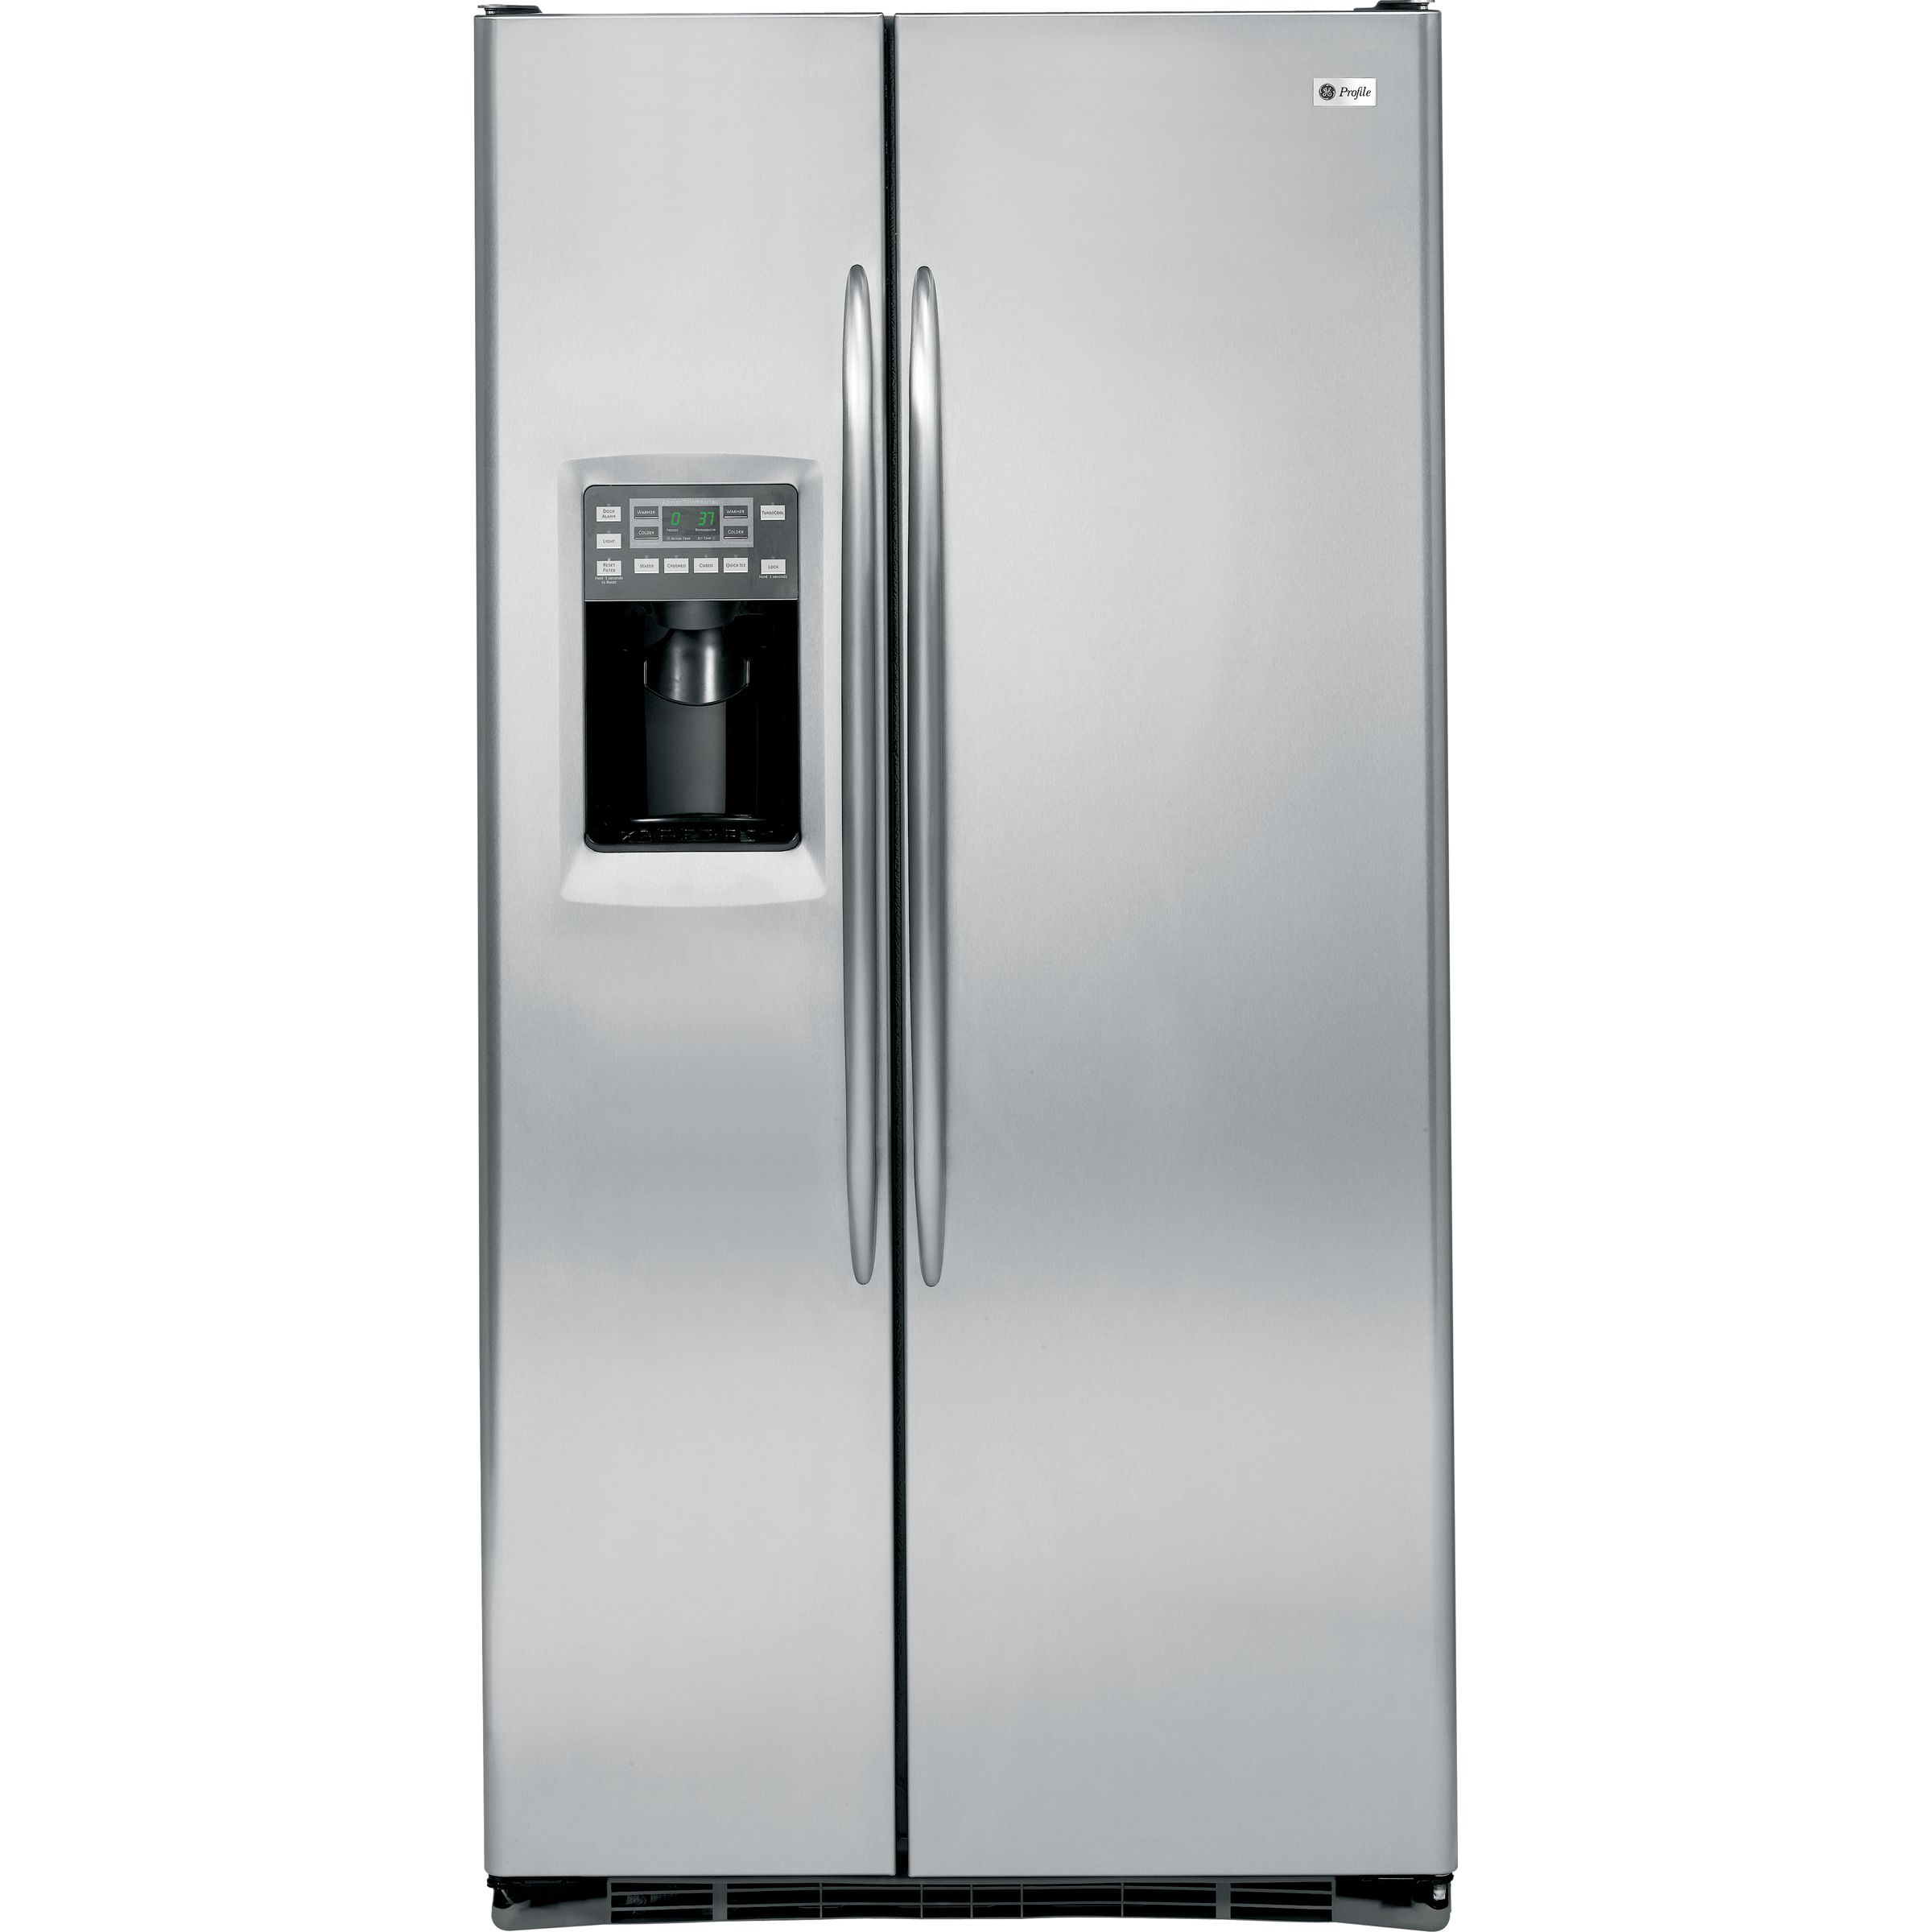 GE Profile Series 24.6 cu. ft. Counter-Depth Side-by-Side Refrigerator Stainless steel